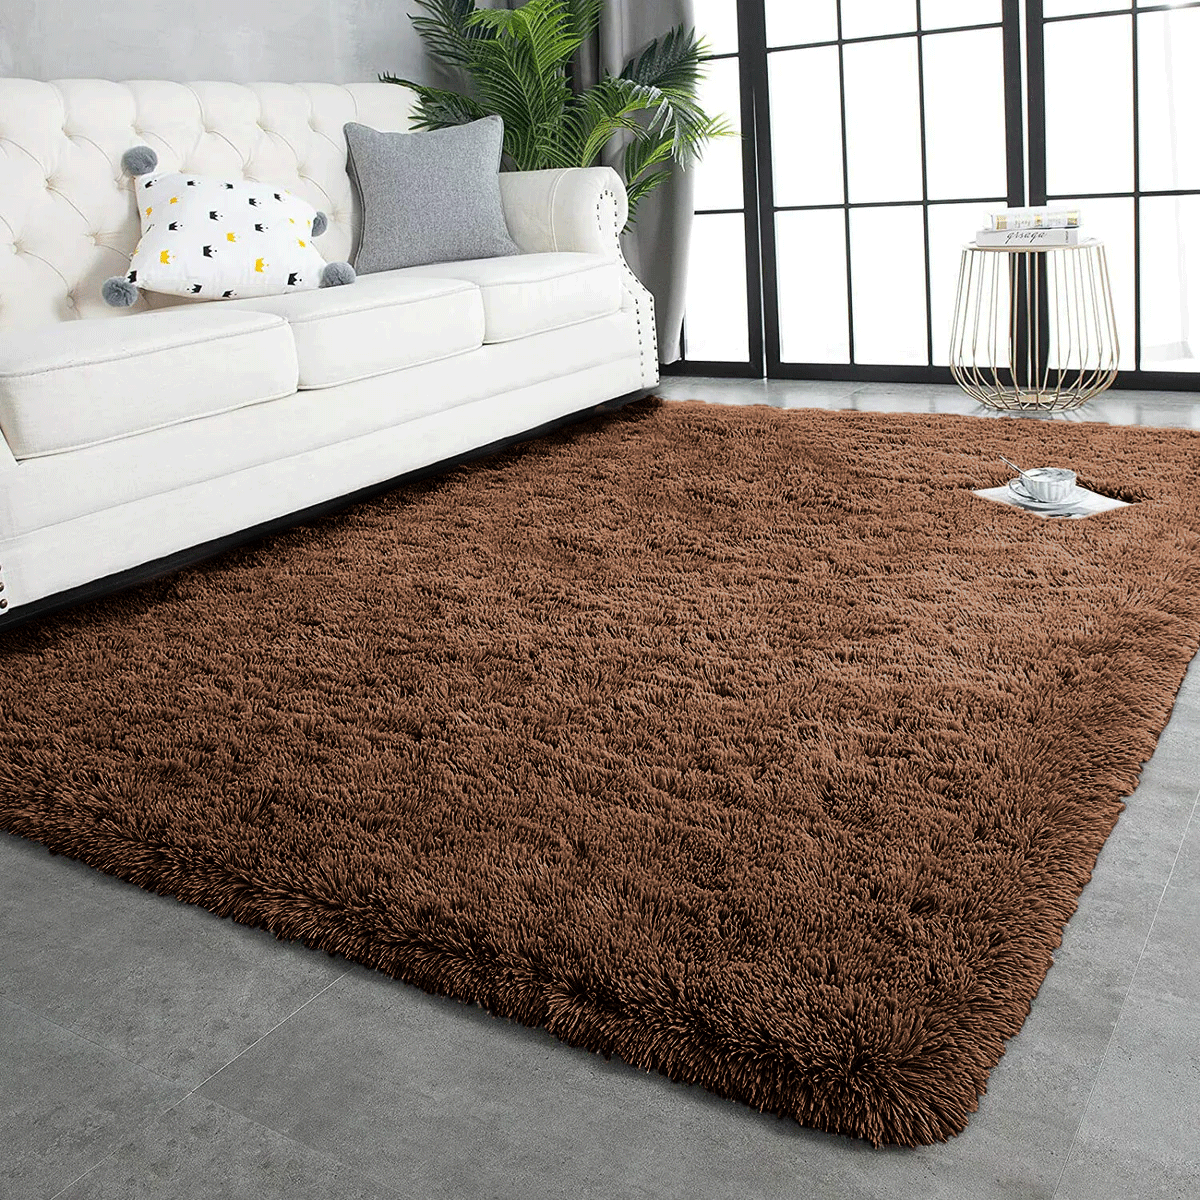 Brown Shaggy Rug Large Fluffy Carpet